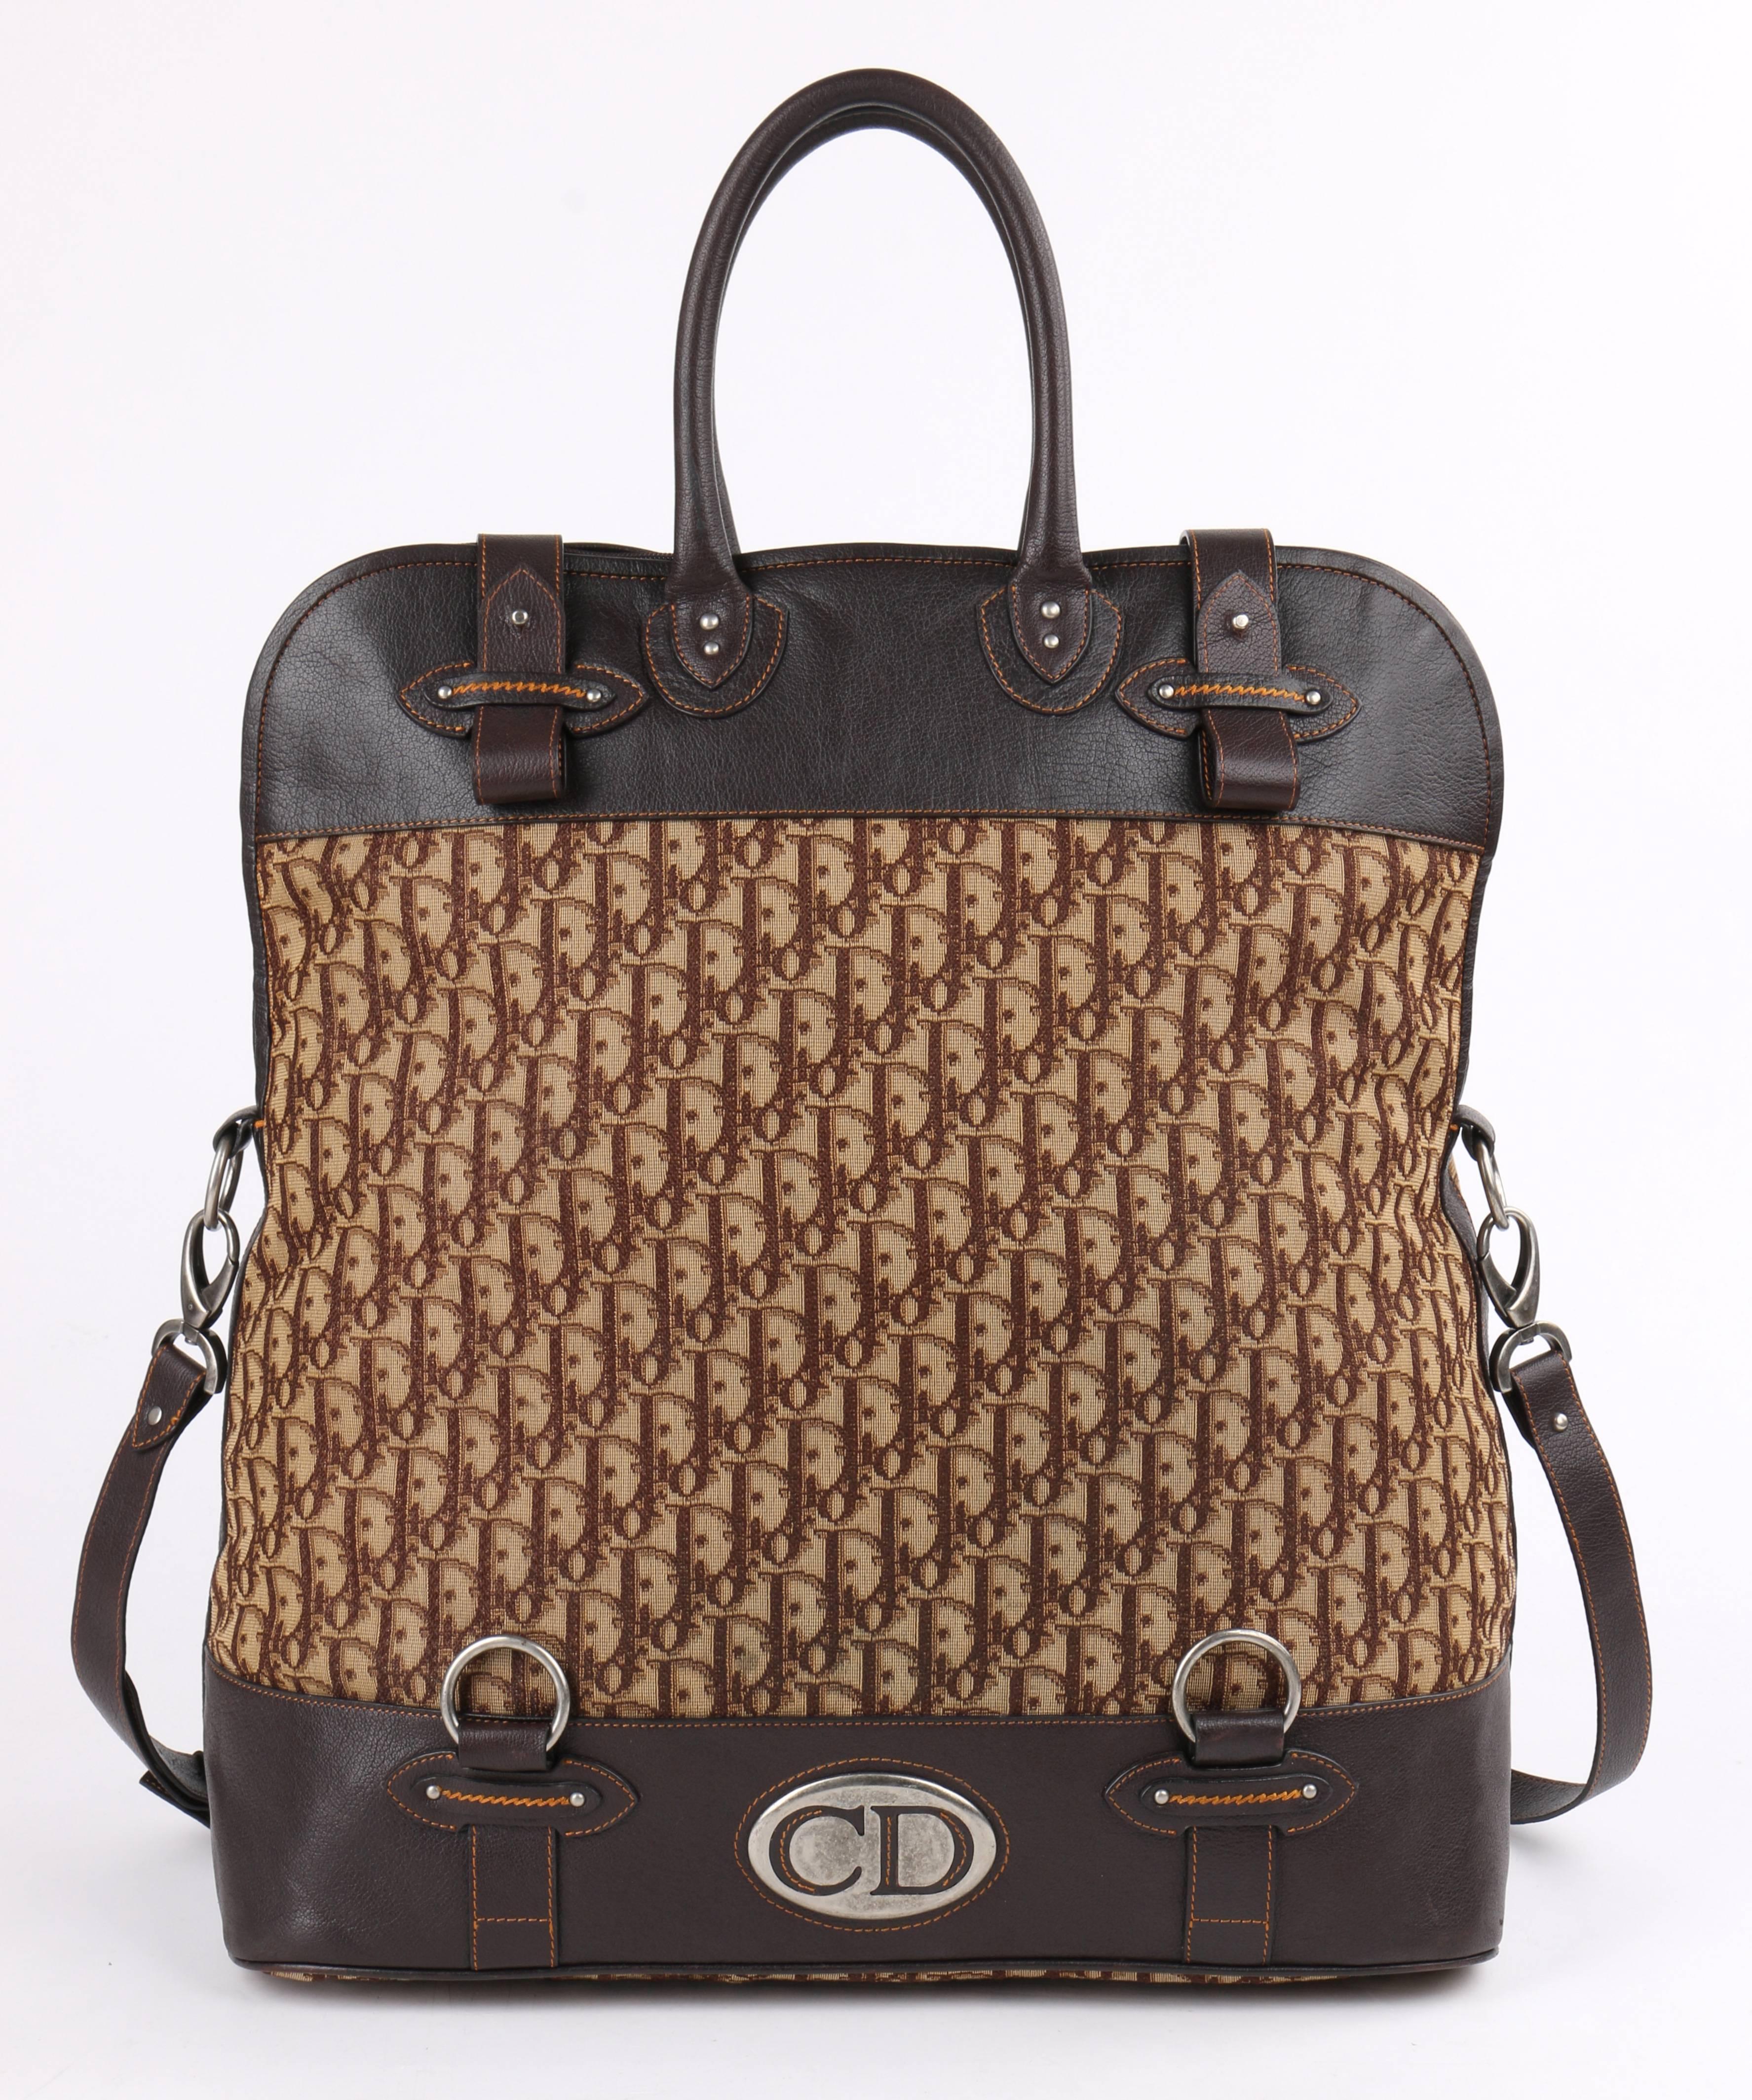 Christian Dior brown Diorissimo monogram canvas and dark brown leather fold-over travel bag. Two single rolled top leather handles. Tan and brown 